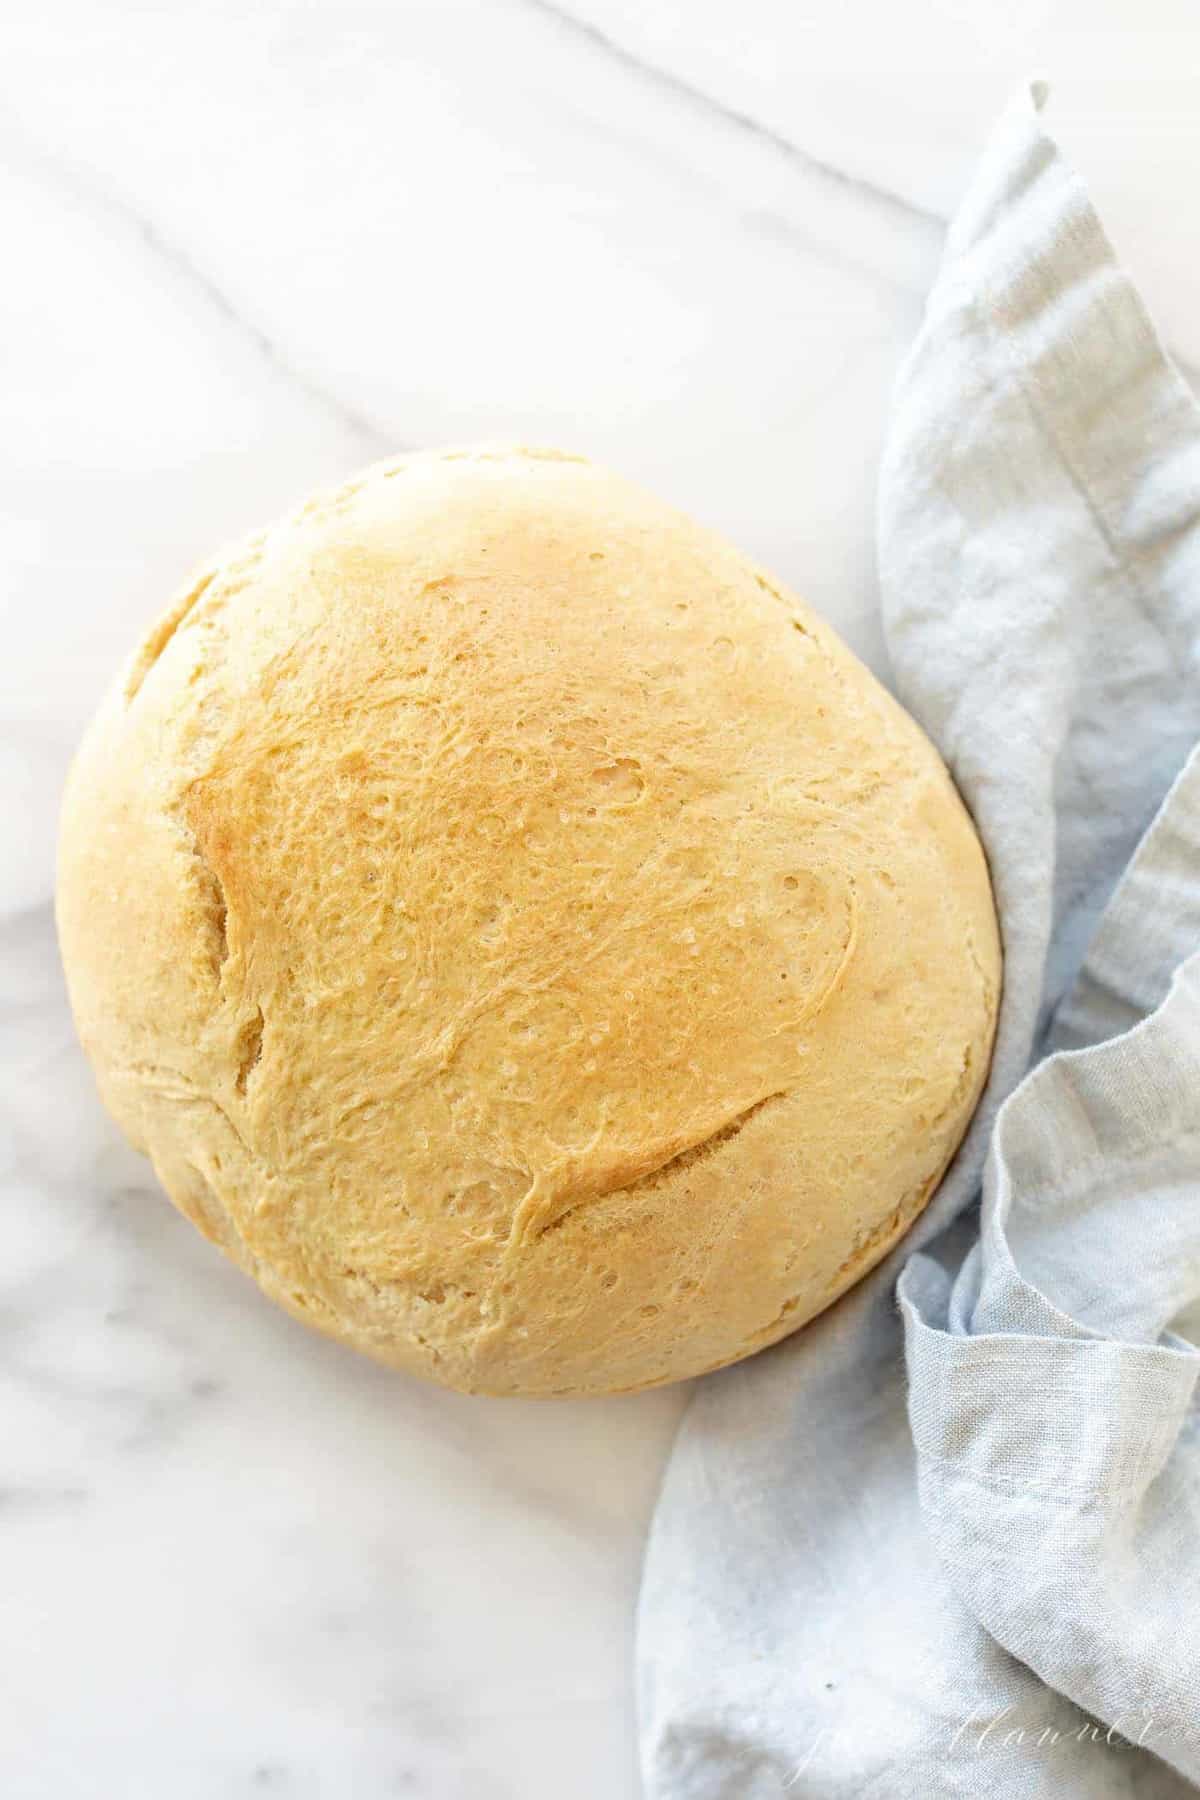 A round loaf of bread made with active dry yeast on a marble surface, blue linen napkin to the side.